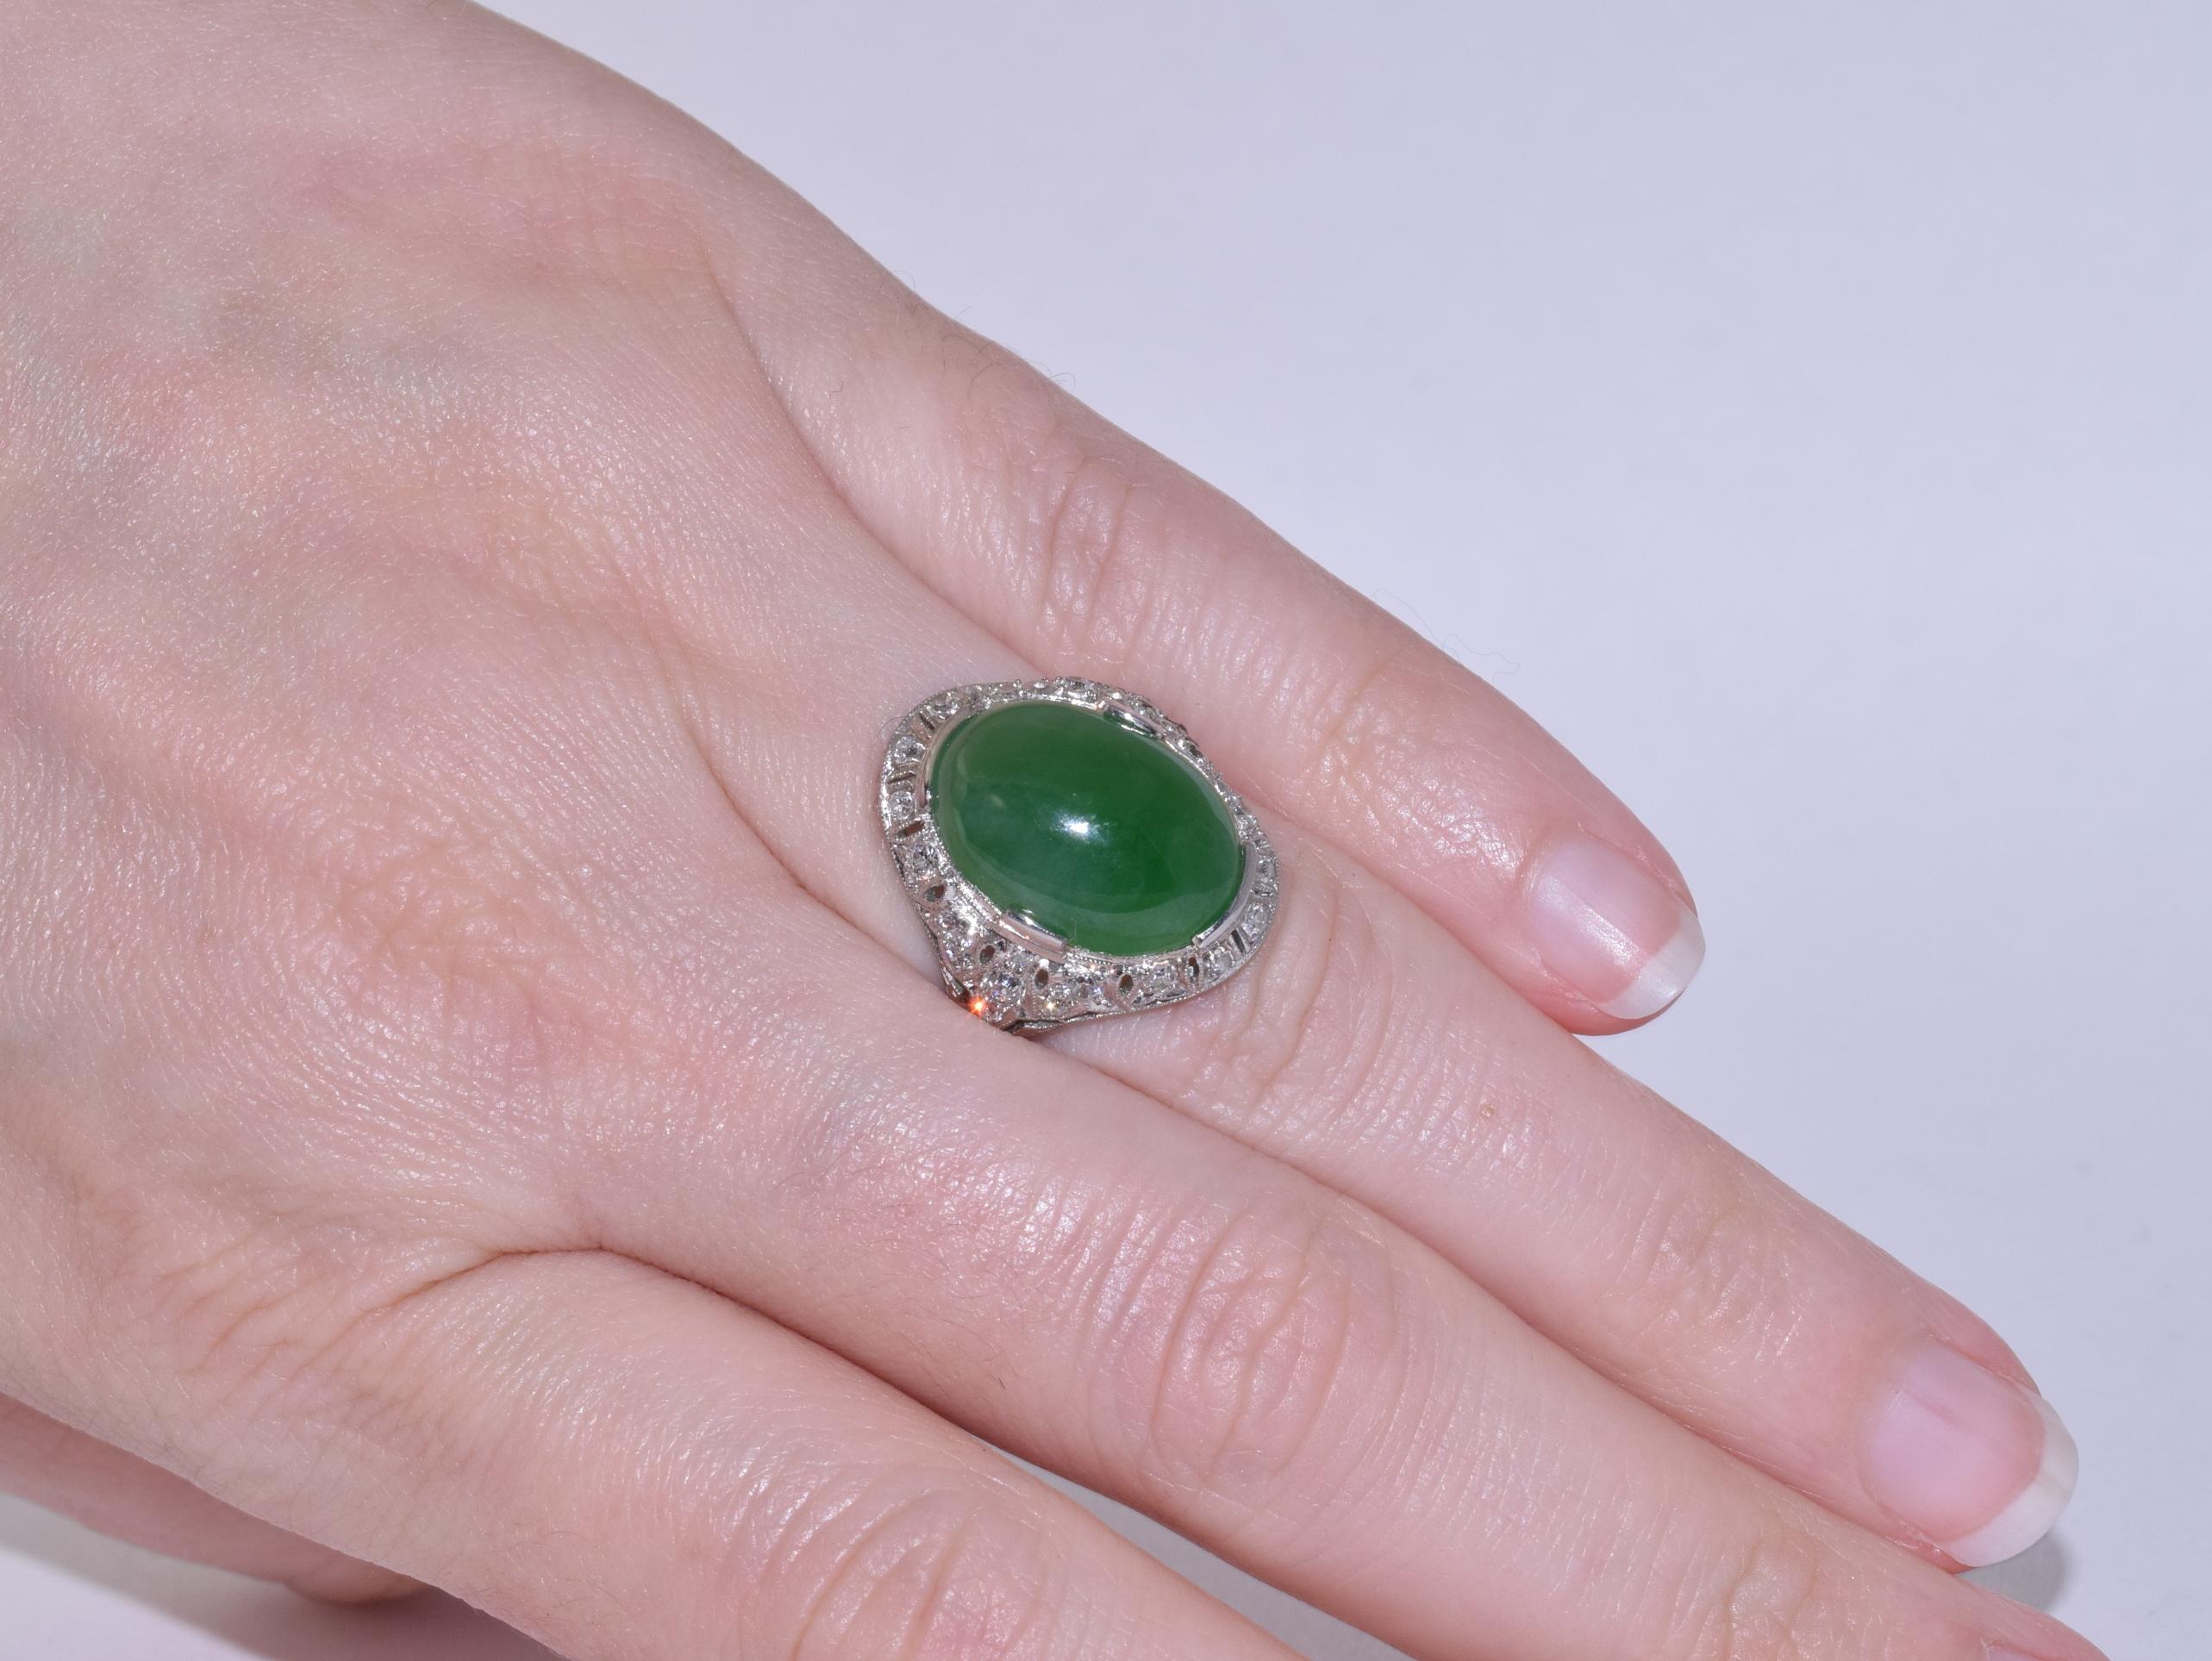 A brightly colored oval jadeite cabochon is accented with old European cut diamonds totaling approximately 0.55 carats set in a delicately pierced platinum ring with millegraining and hand-engraved details. Ring size 6.25. The jadeite cabochon